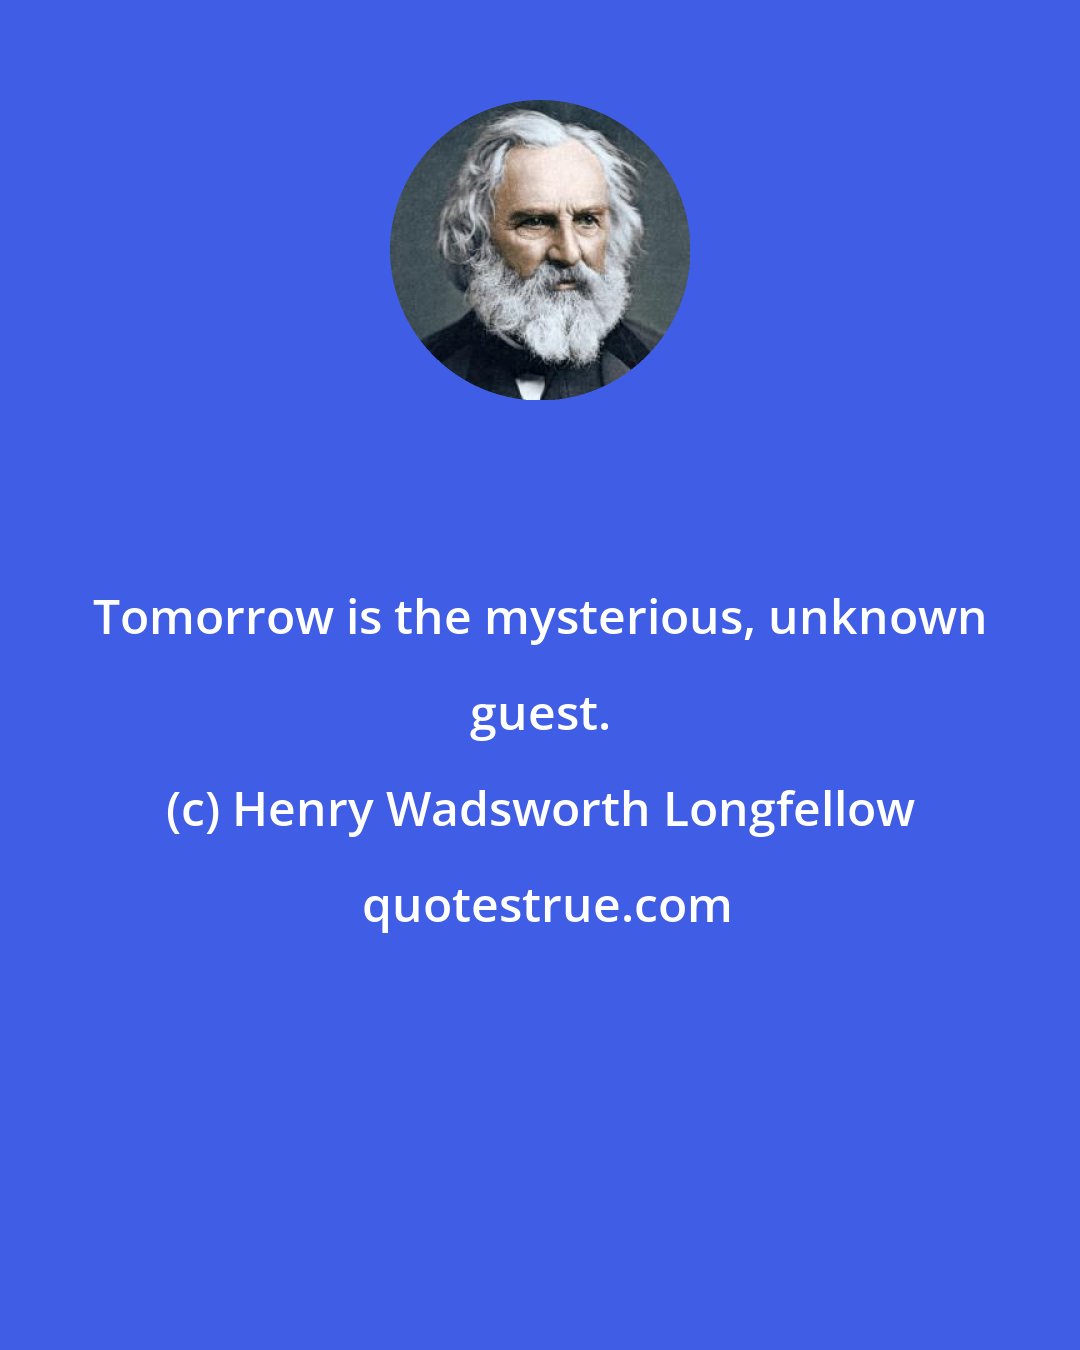 Henry Wadsworth Longfellow: Tomorrow is the mysterious, unknown guest.